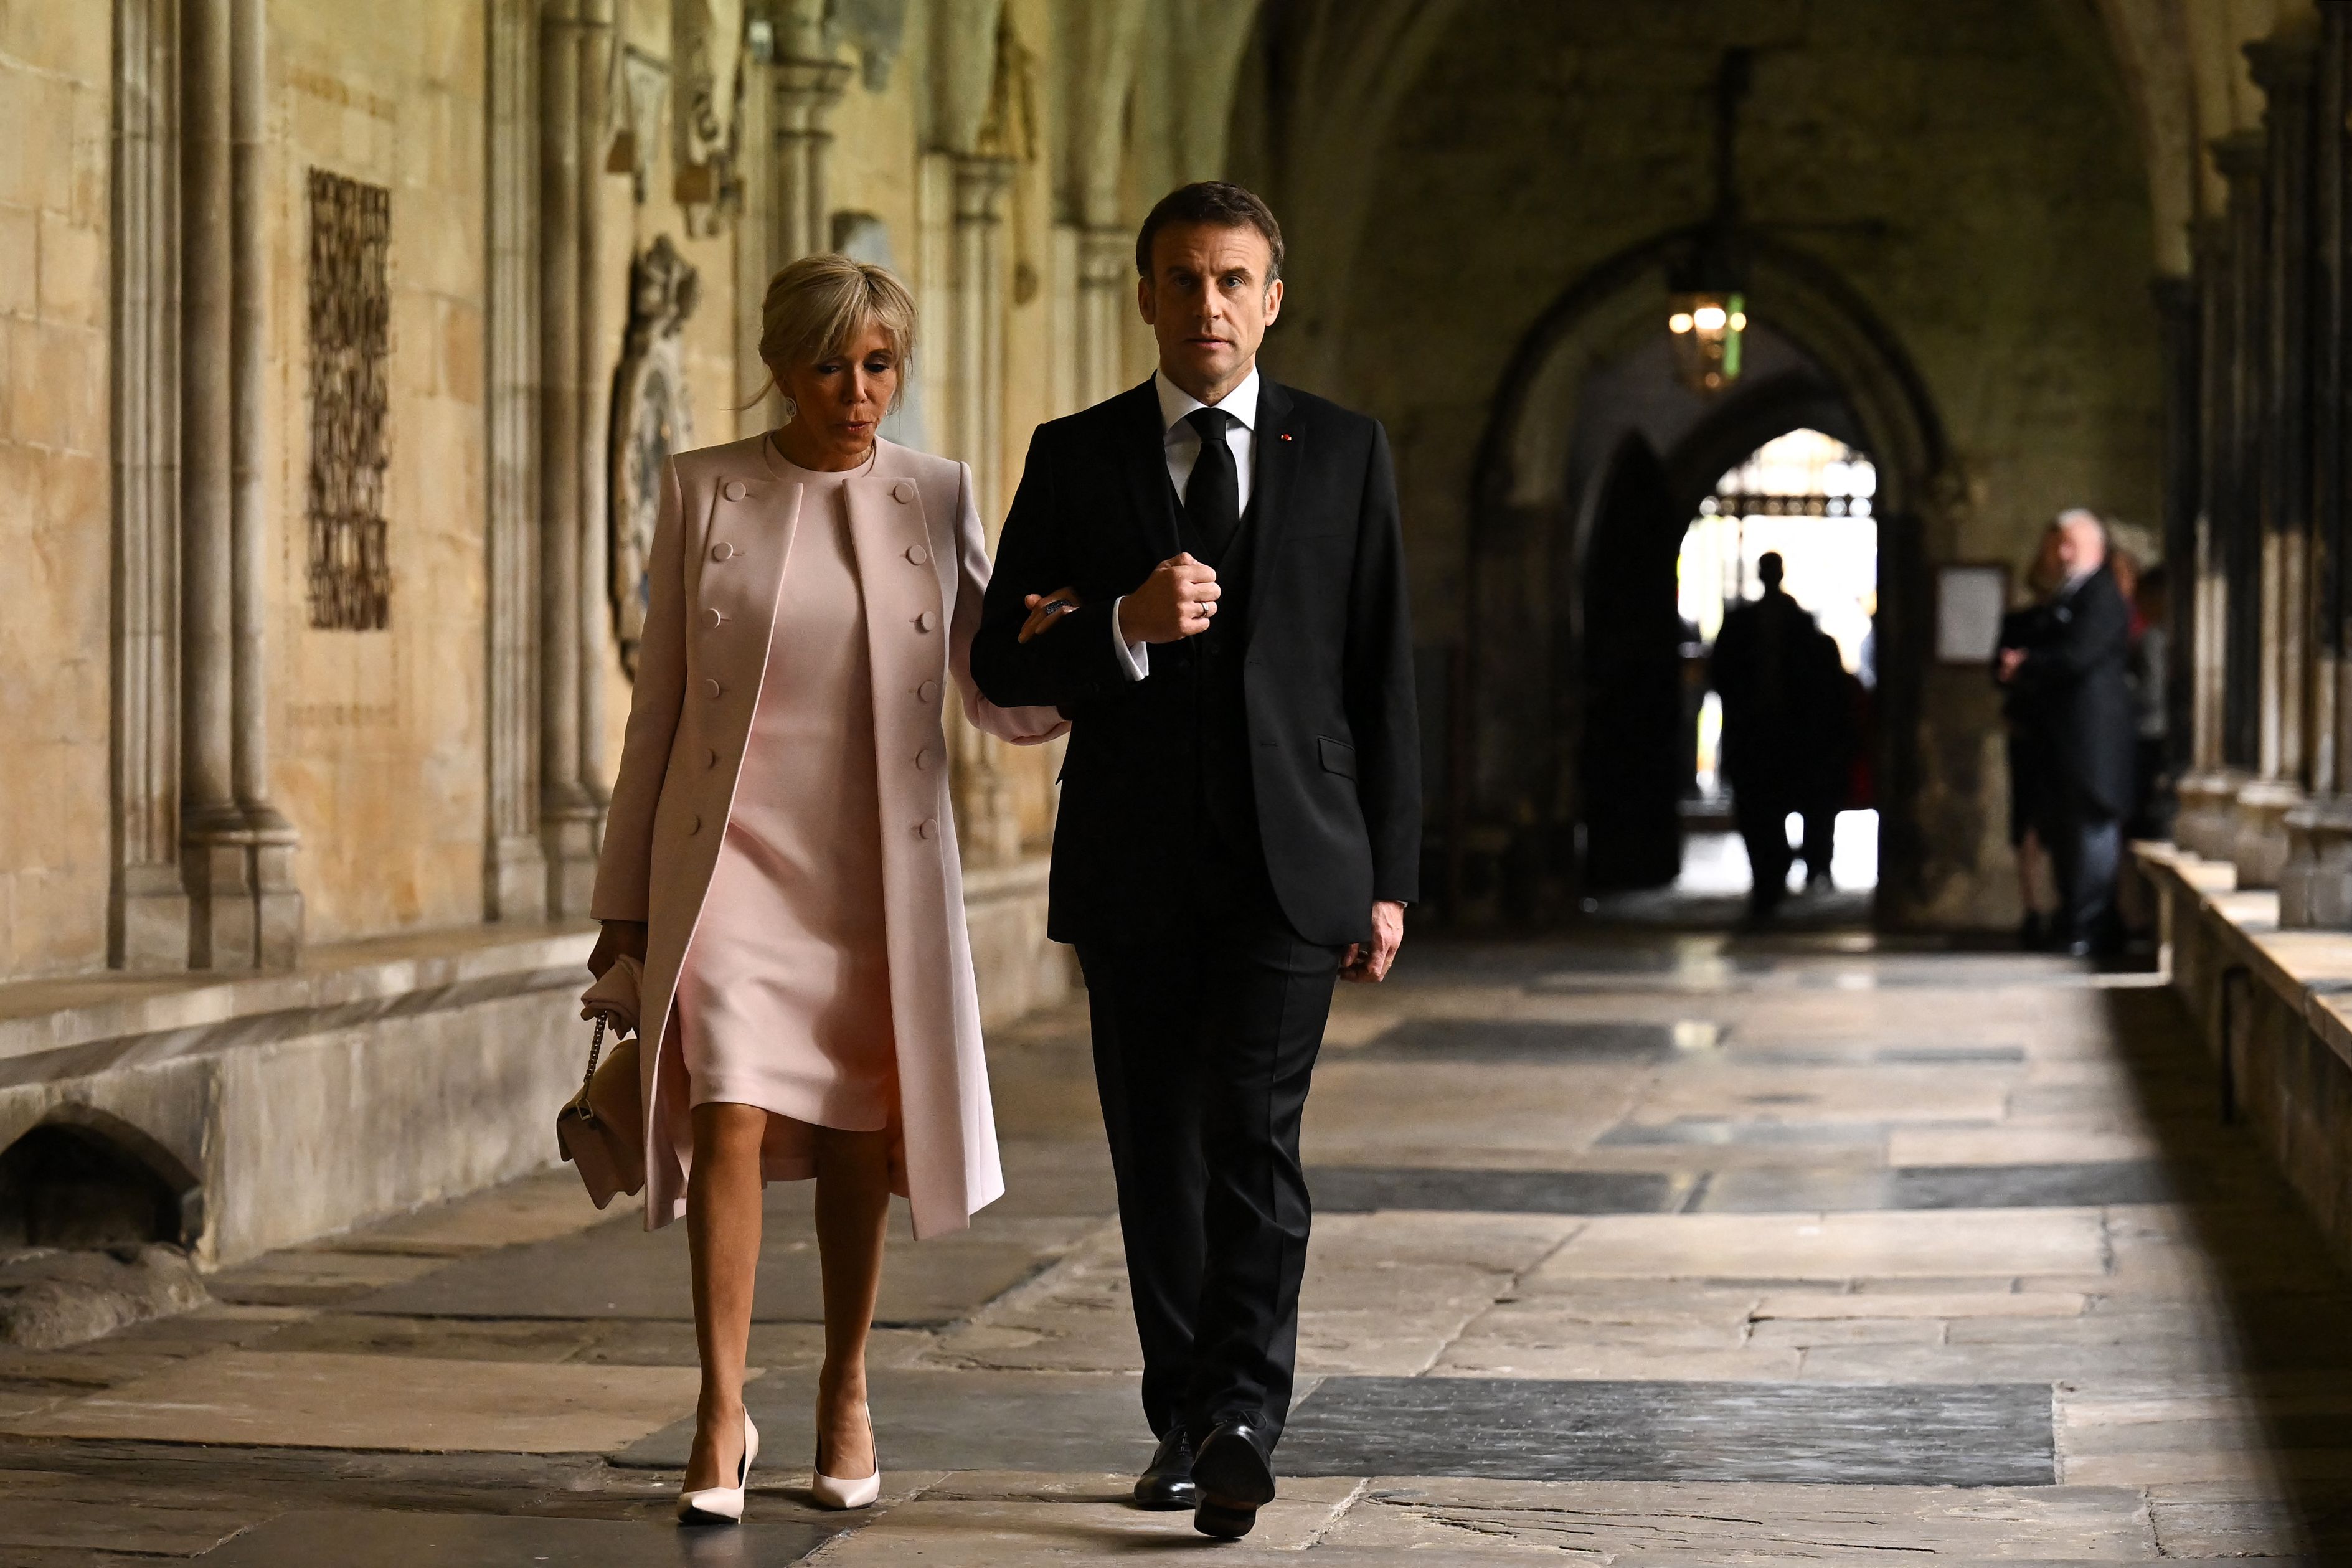 French President Emmanuel Macron arrived at Westminster Church with his wife